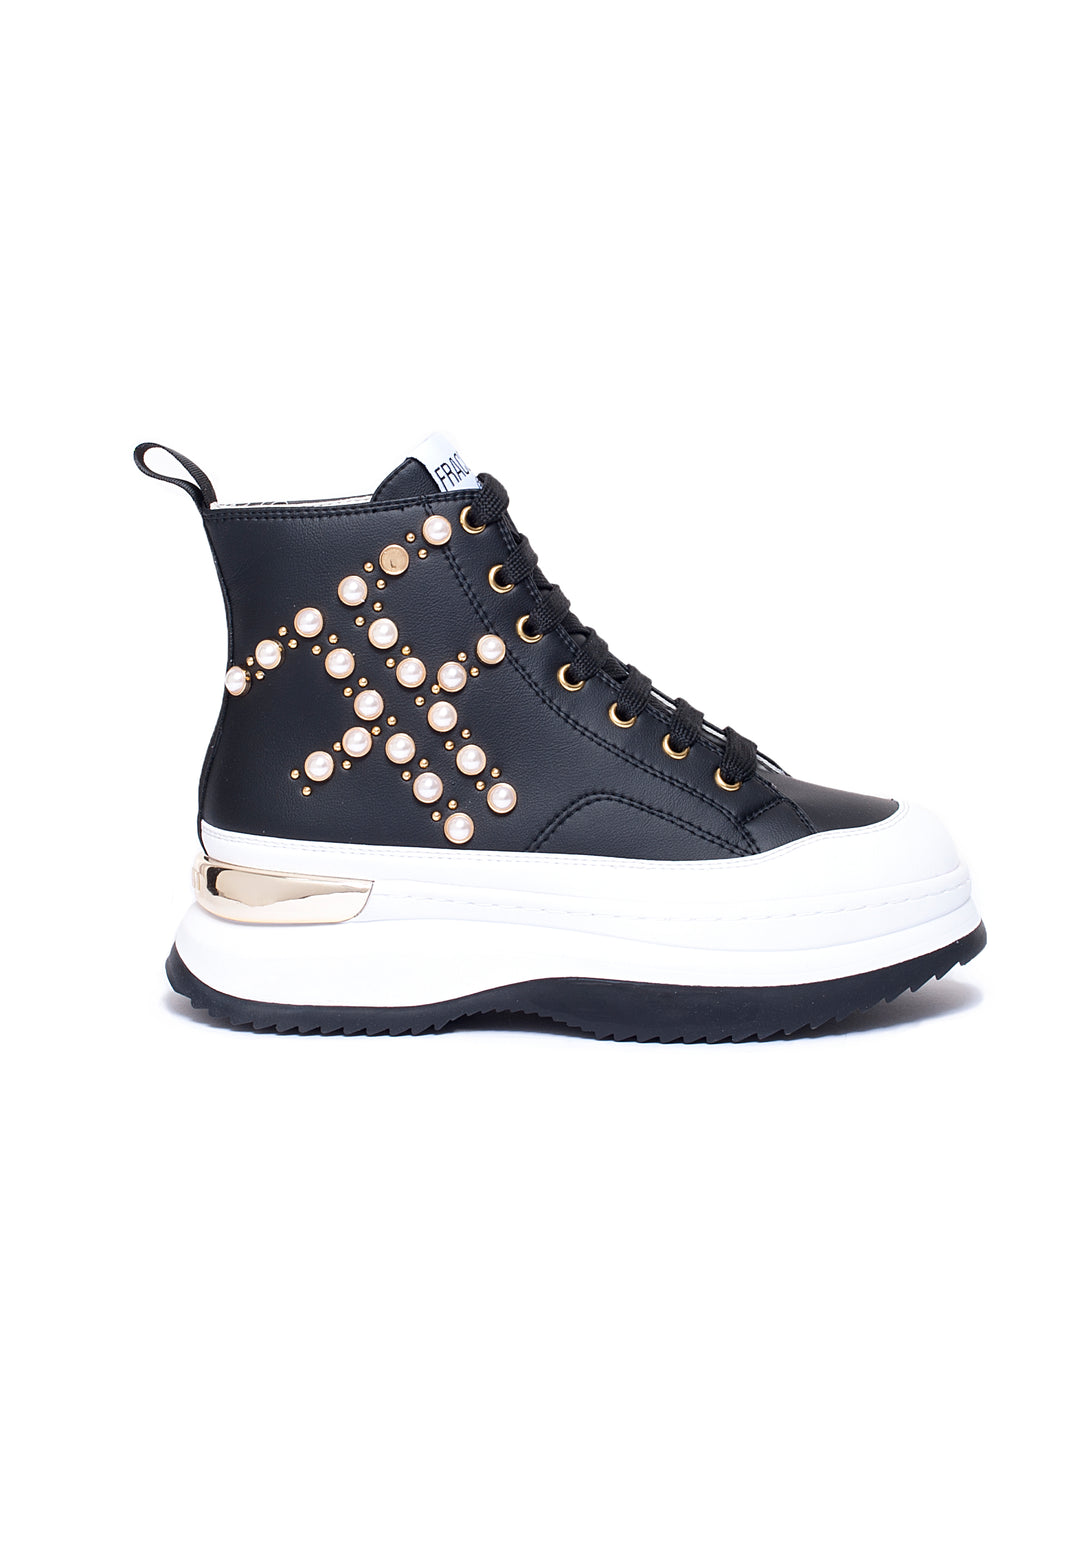 Sneakers made in eco leather with pearls Fracomina F721WS6001P41101-053